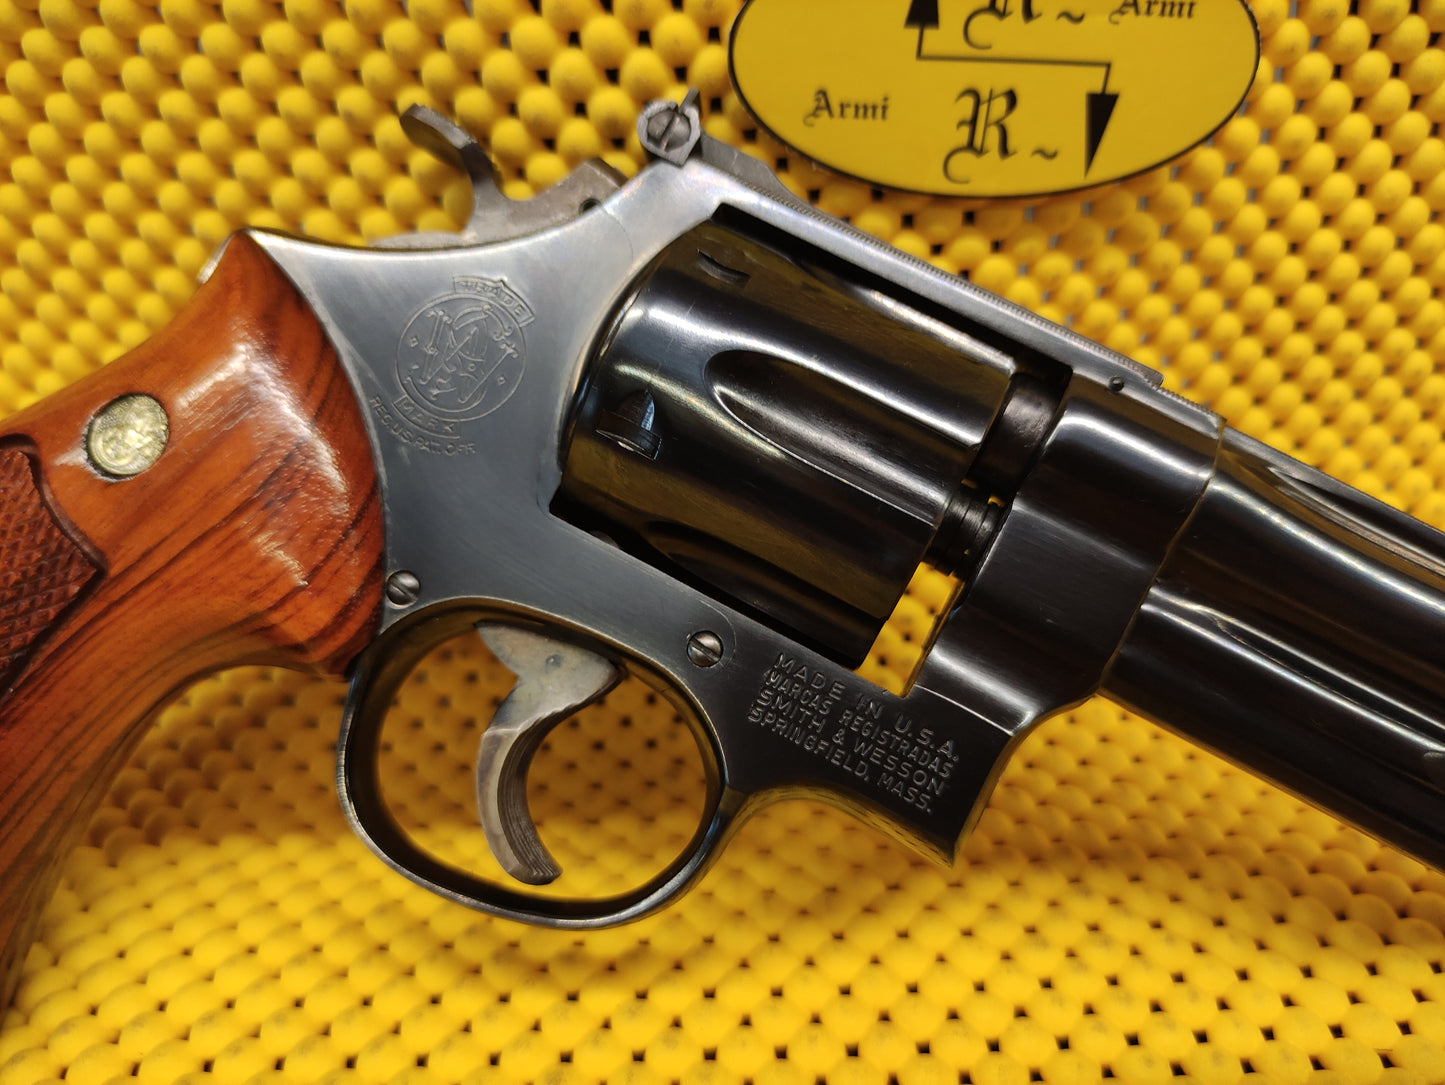 Smith & Wesson 27-2